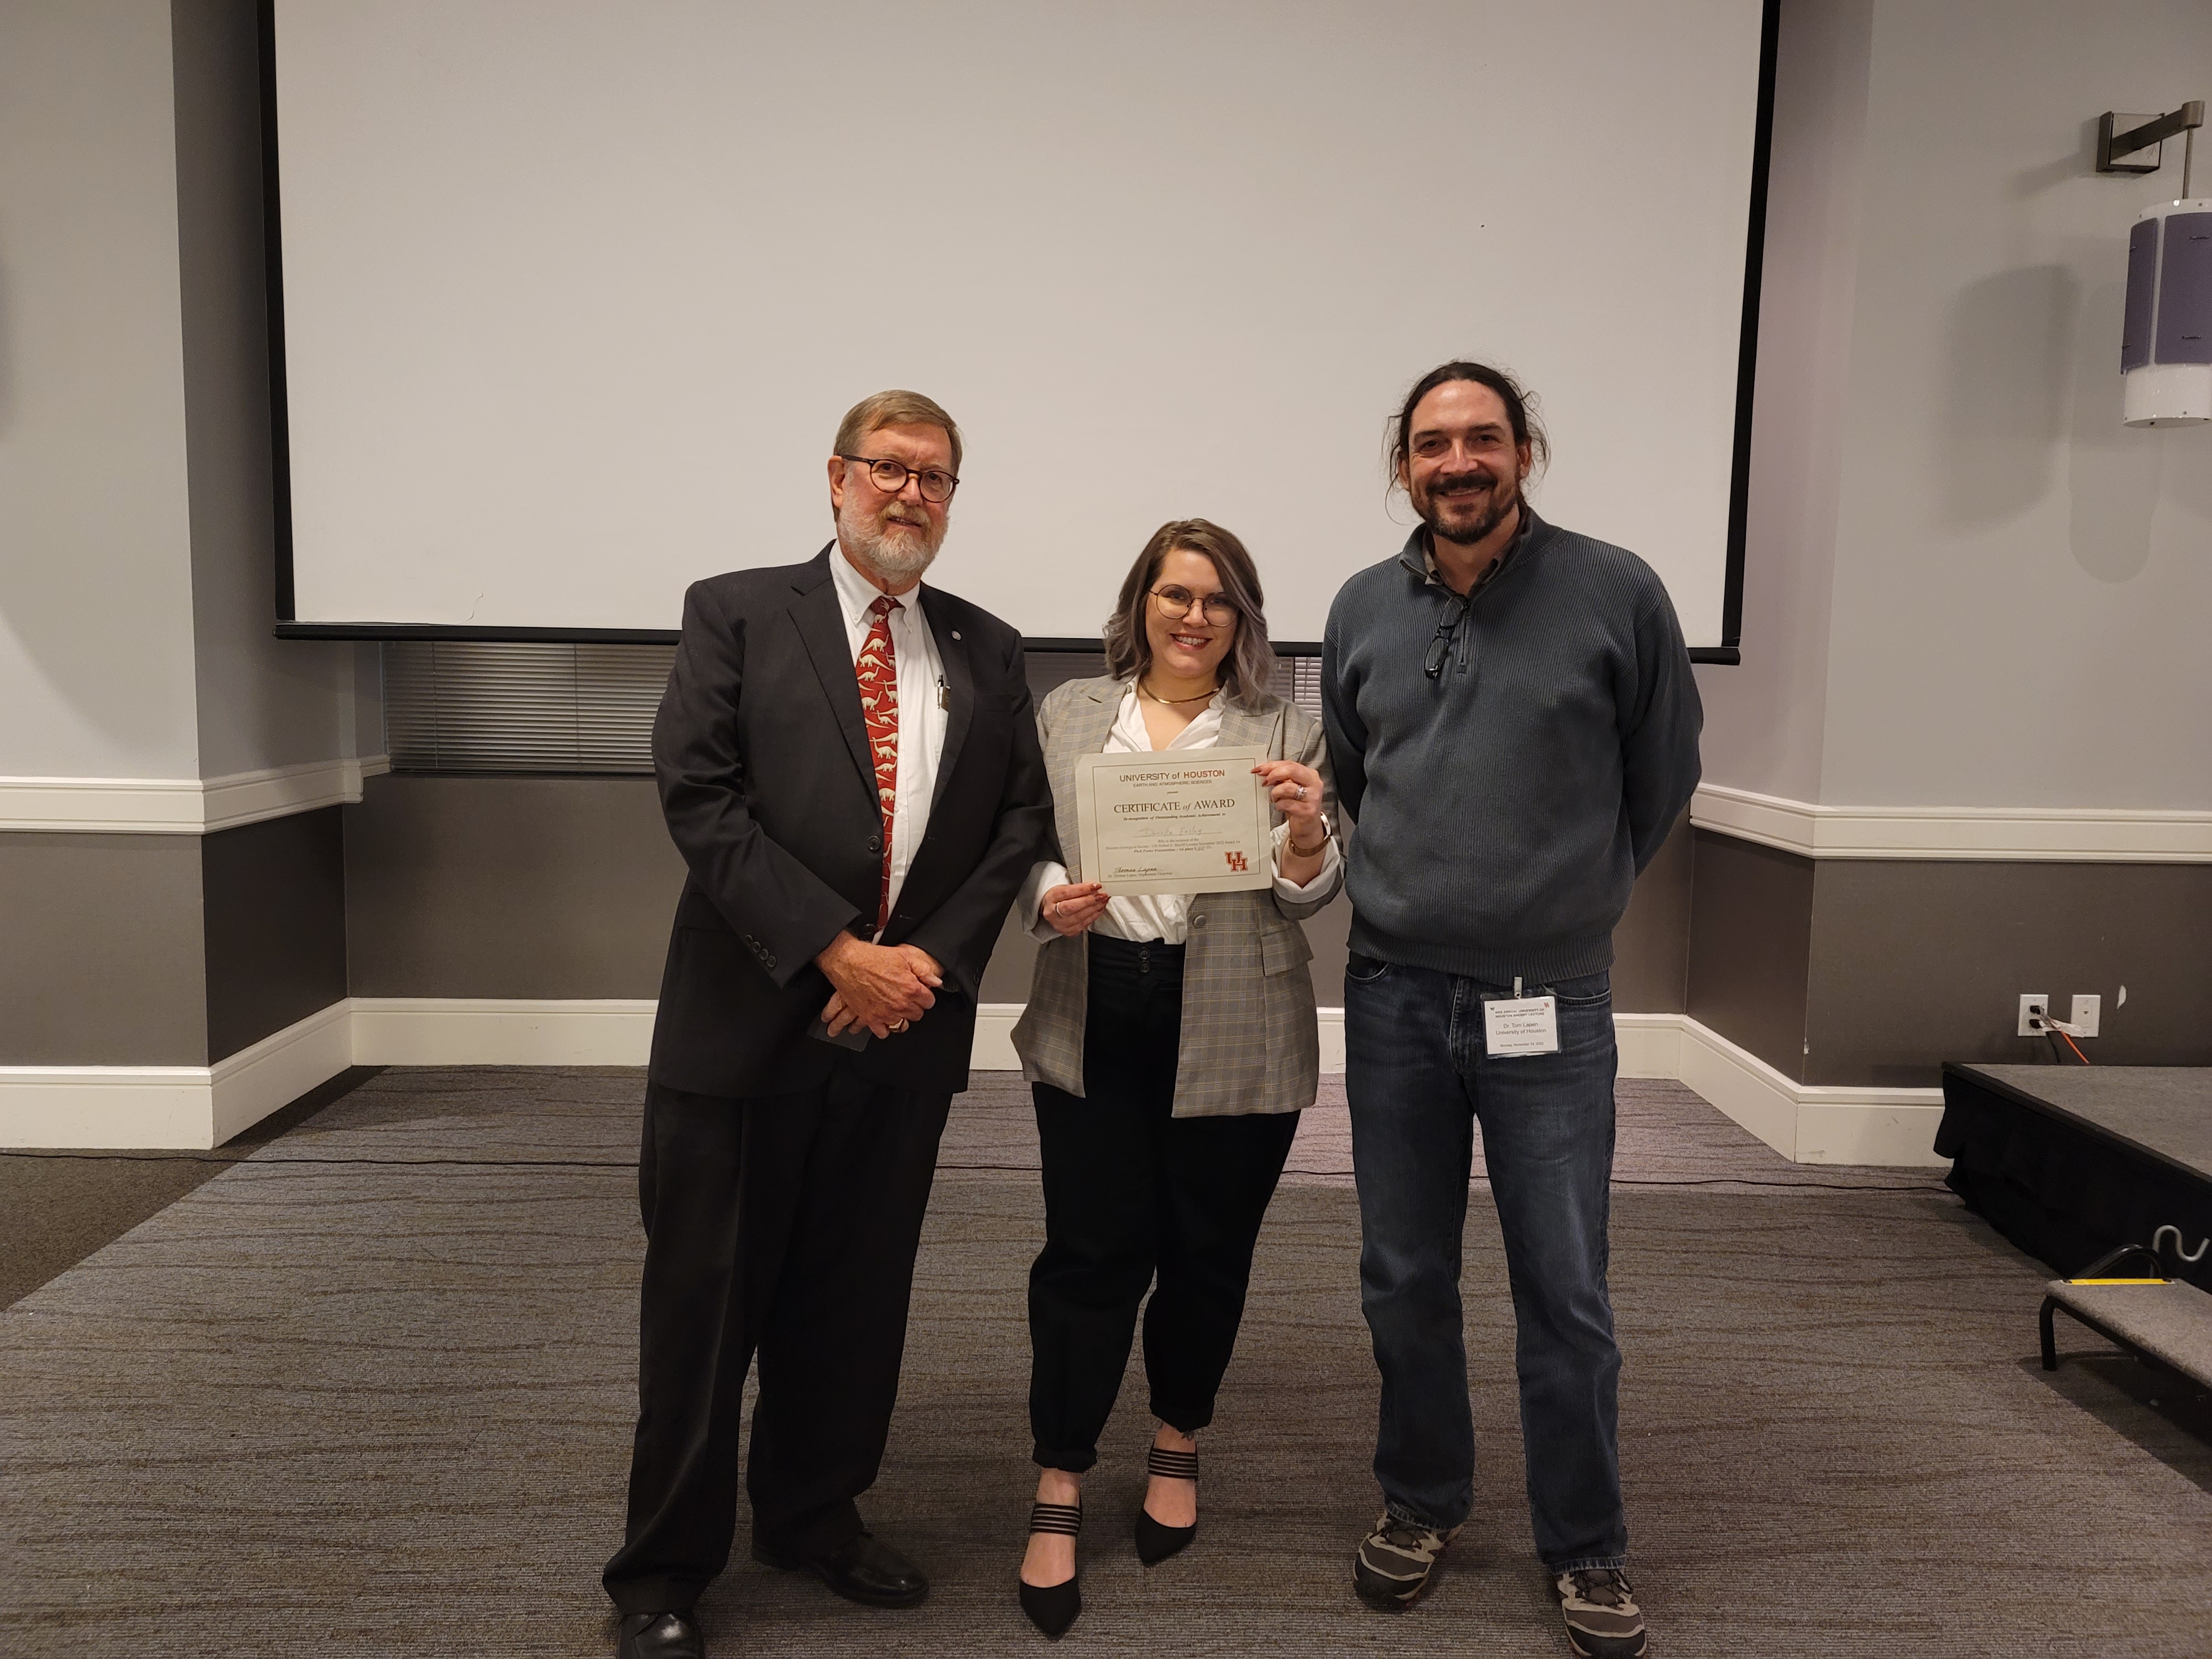 PhD student Daniella Easley wins 1st place in the Advanced PhD category at this year's HGS/EAS Sheriff Lecture